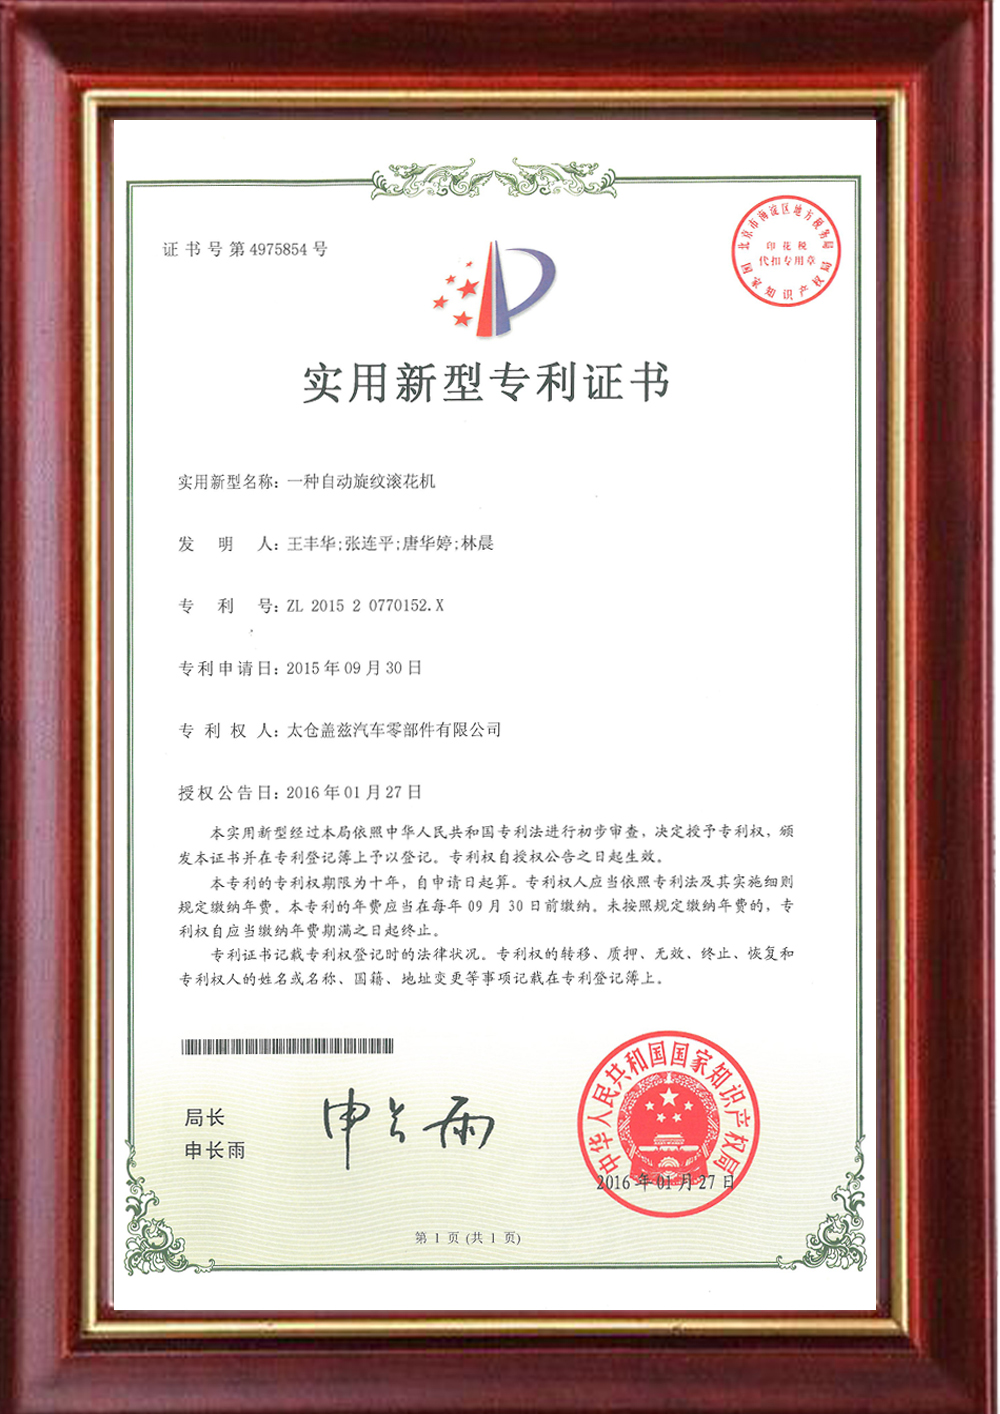 Utility model patent certificate - automatic spinning knurling machine